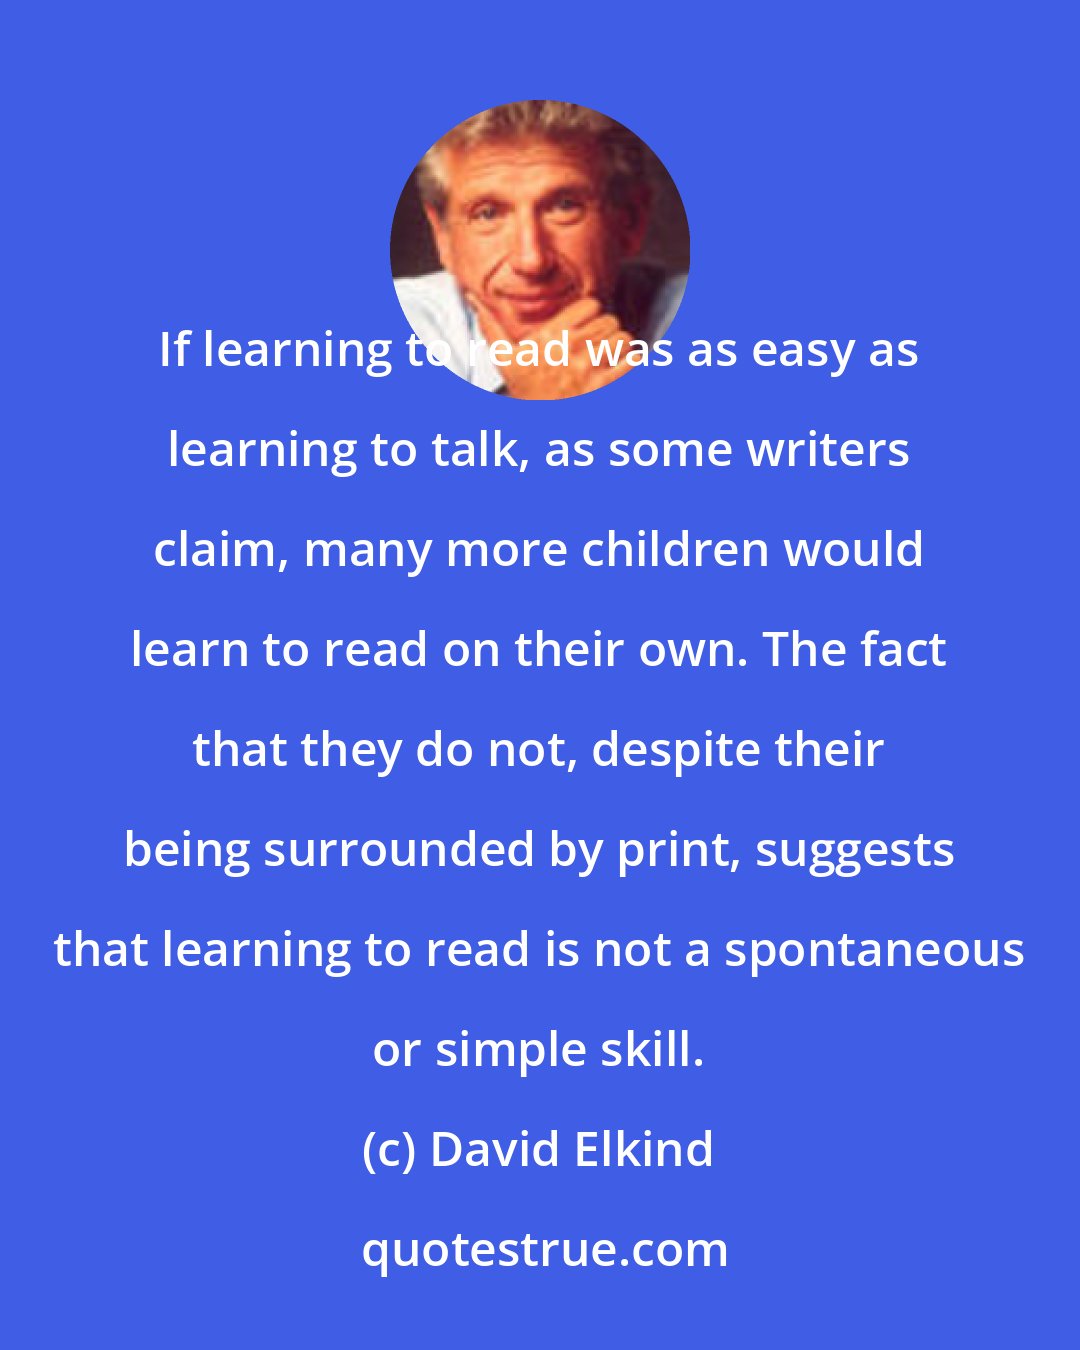 David Elkind: If learning to read was as easy as learning to talk, as some writers claim, many more children would learn to read on their own. The fact that they do not, despite their being surrounded by print, suggests that learning to read is not a spontaneous or simple skill.